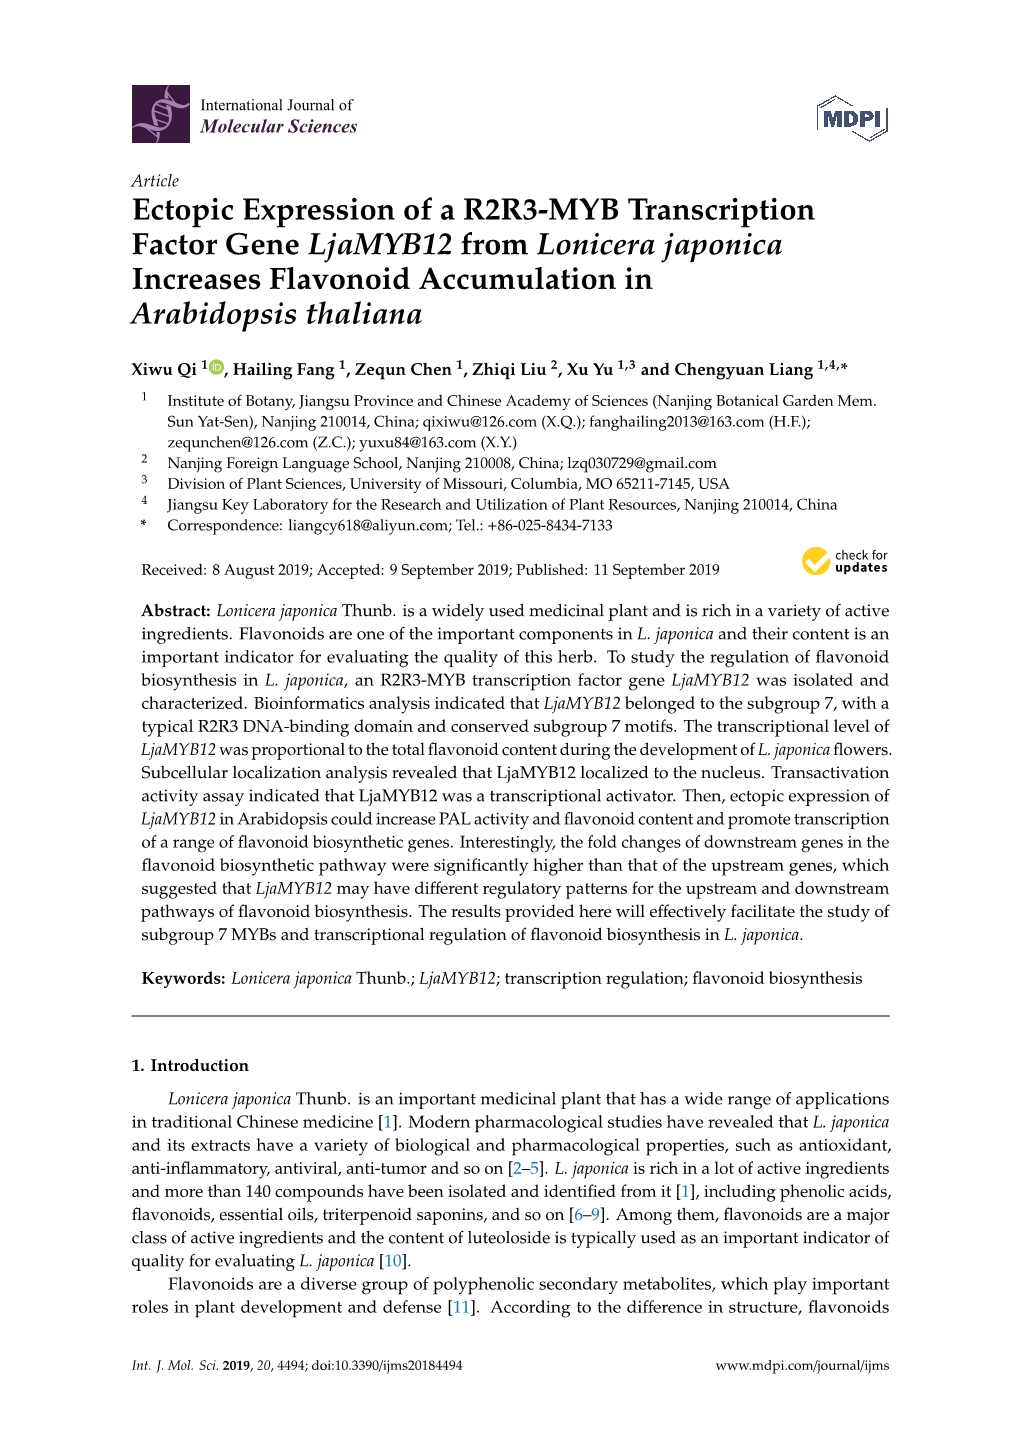 Ectopic Expression of a R2R3-MYB Transcription Factor Gene Ljamyb12 from Lonicera Japonica Increases Flavonoid Accumulation in Arabidopsis Thaliana